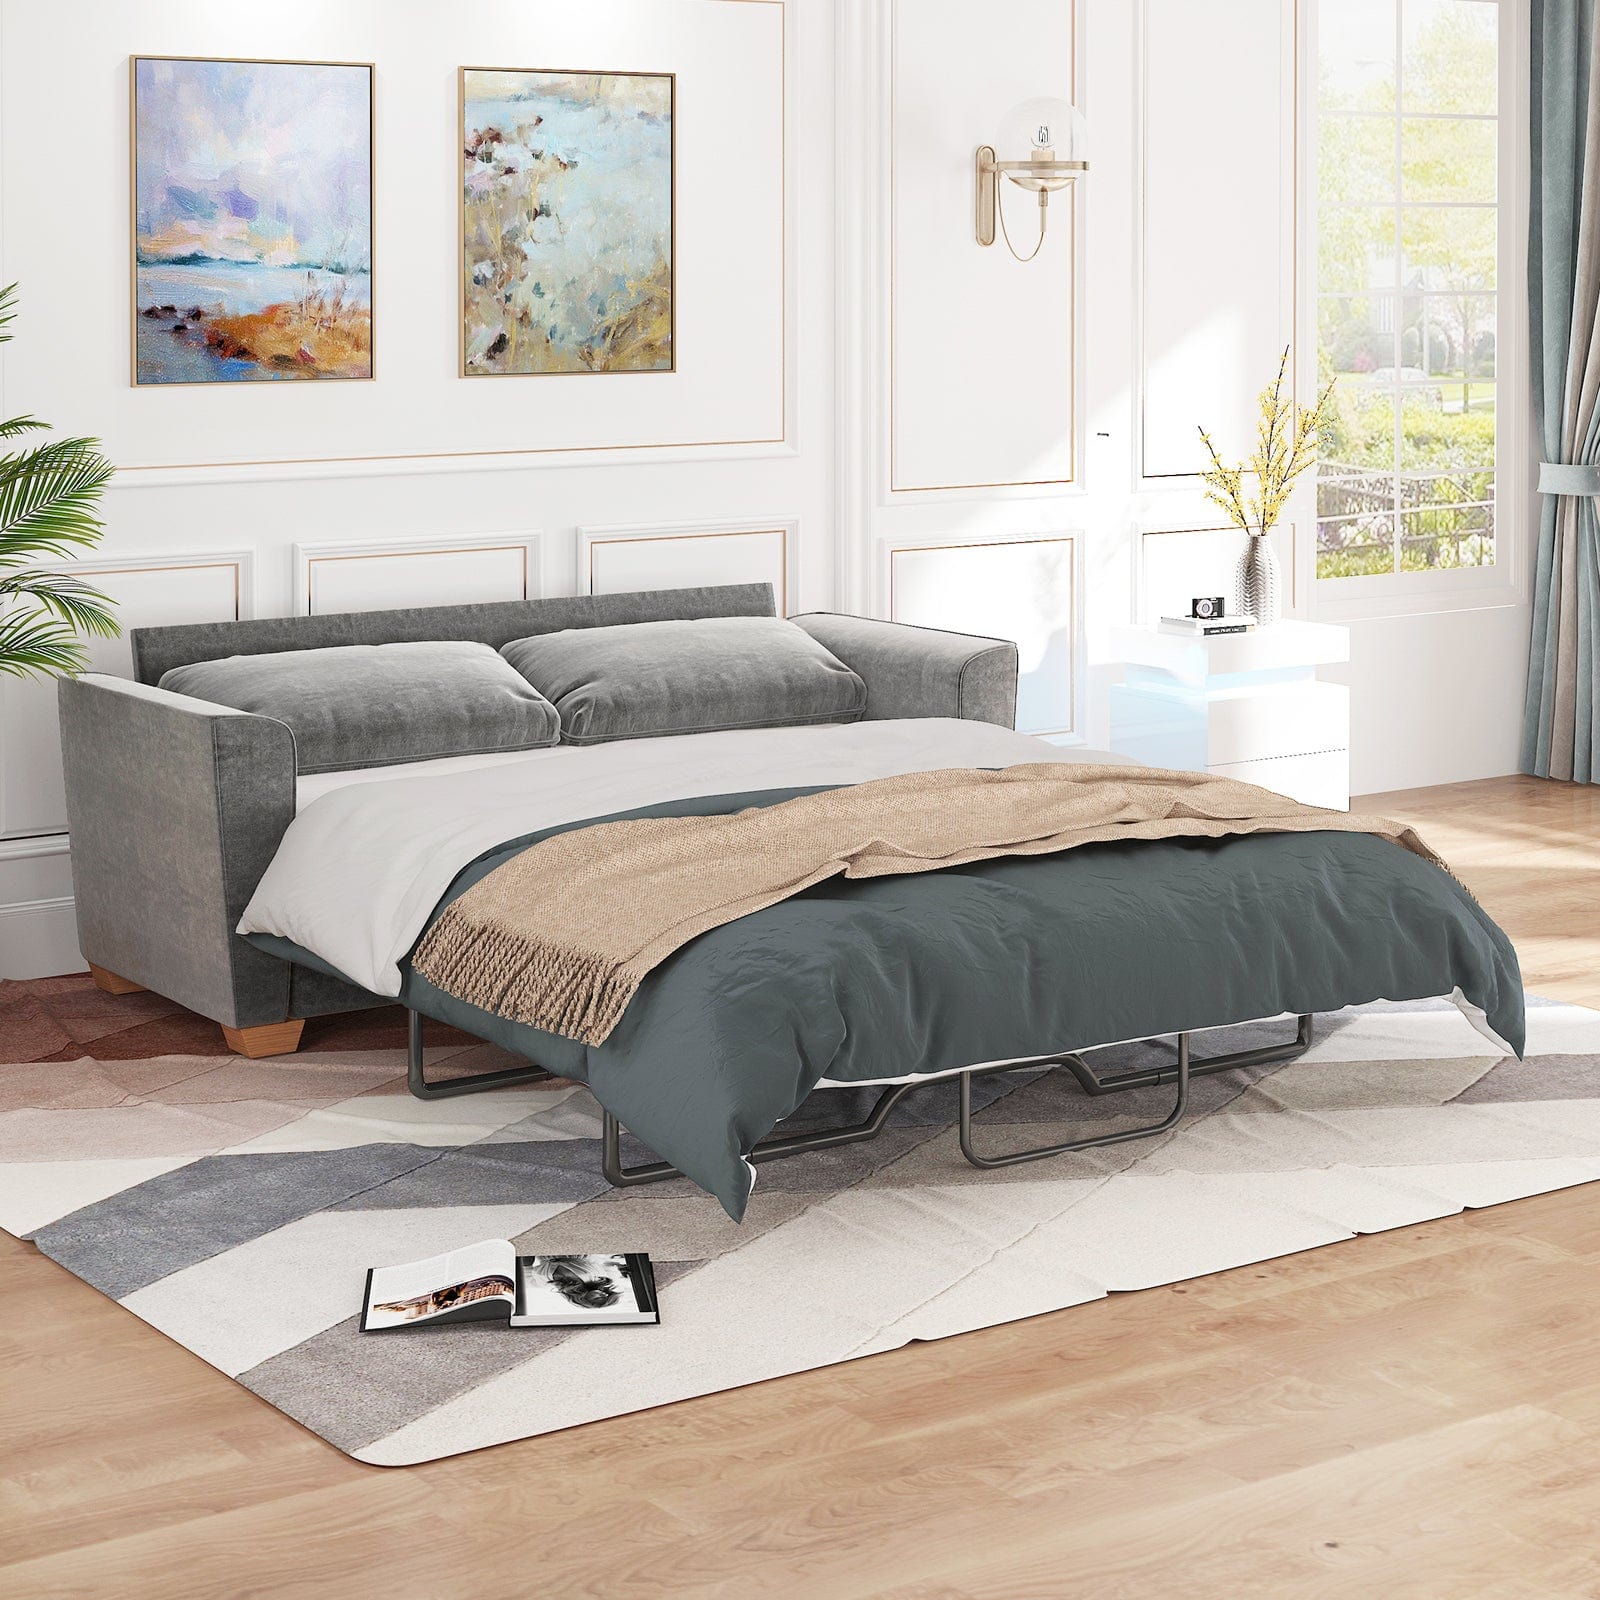 Sofa Bed | 2 In1 Pull Out Sofa Bed With Memory Foam Mattress - uenjoysofa bed